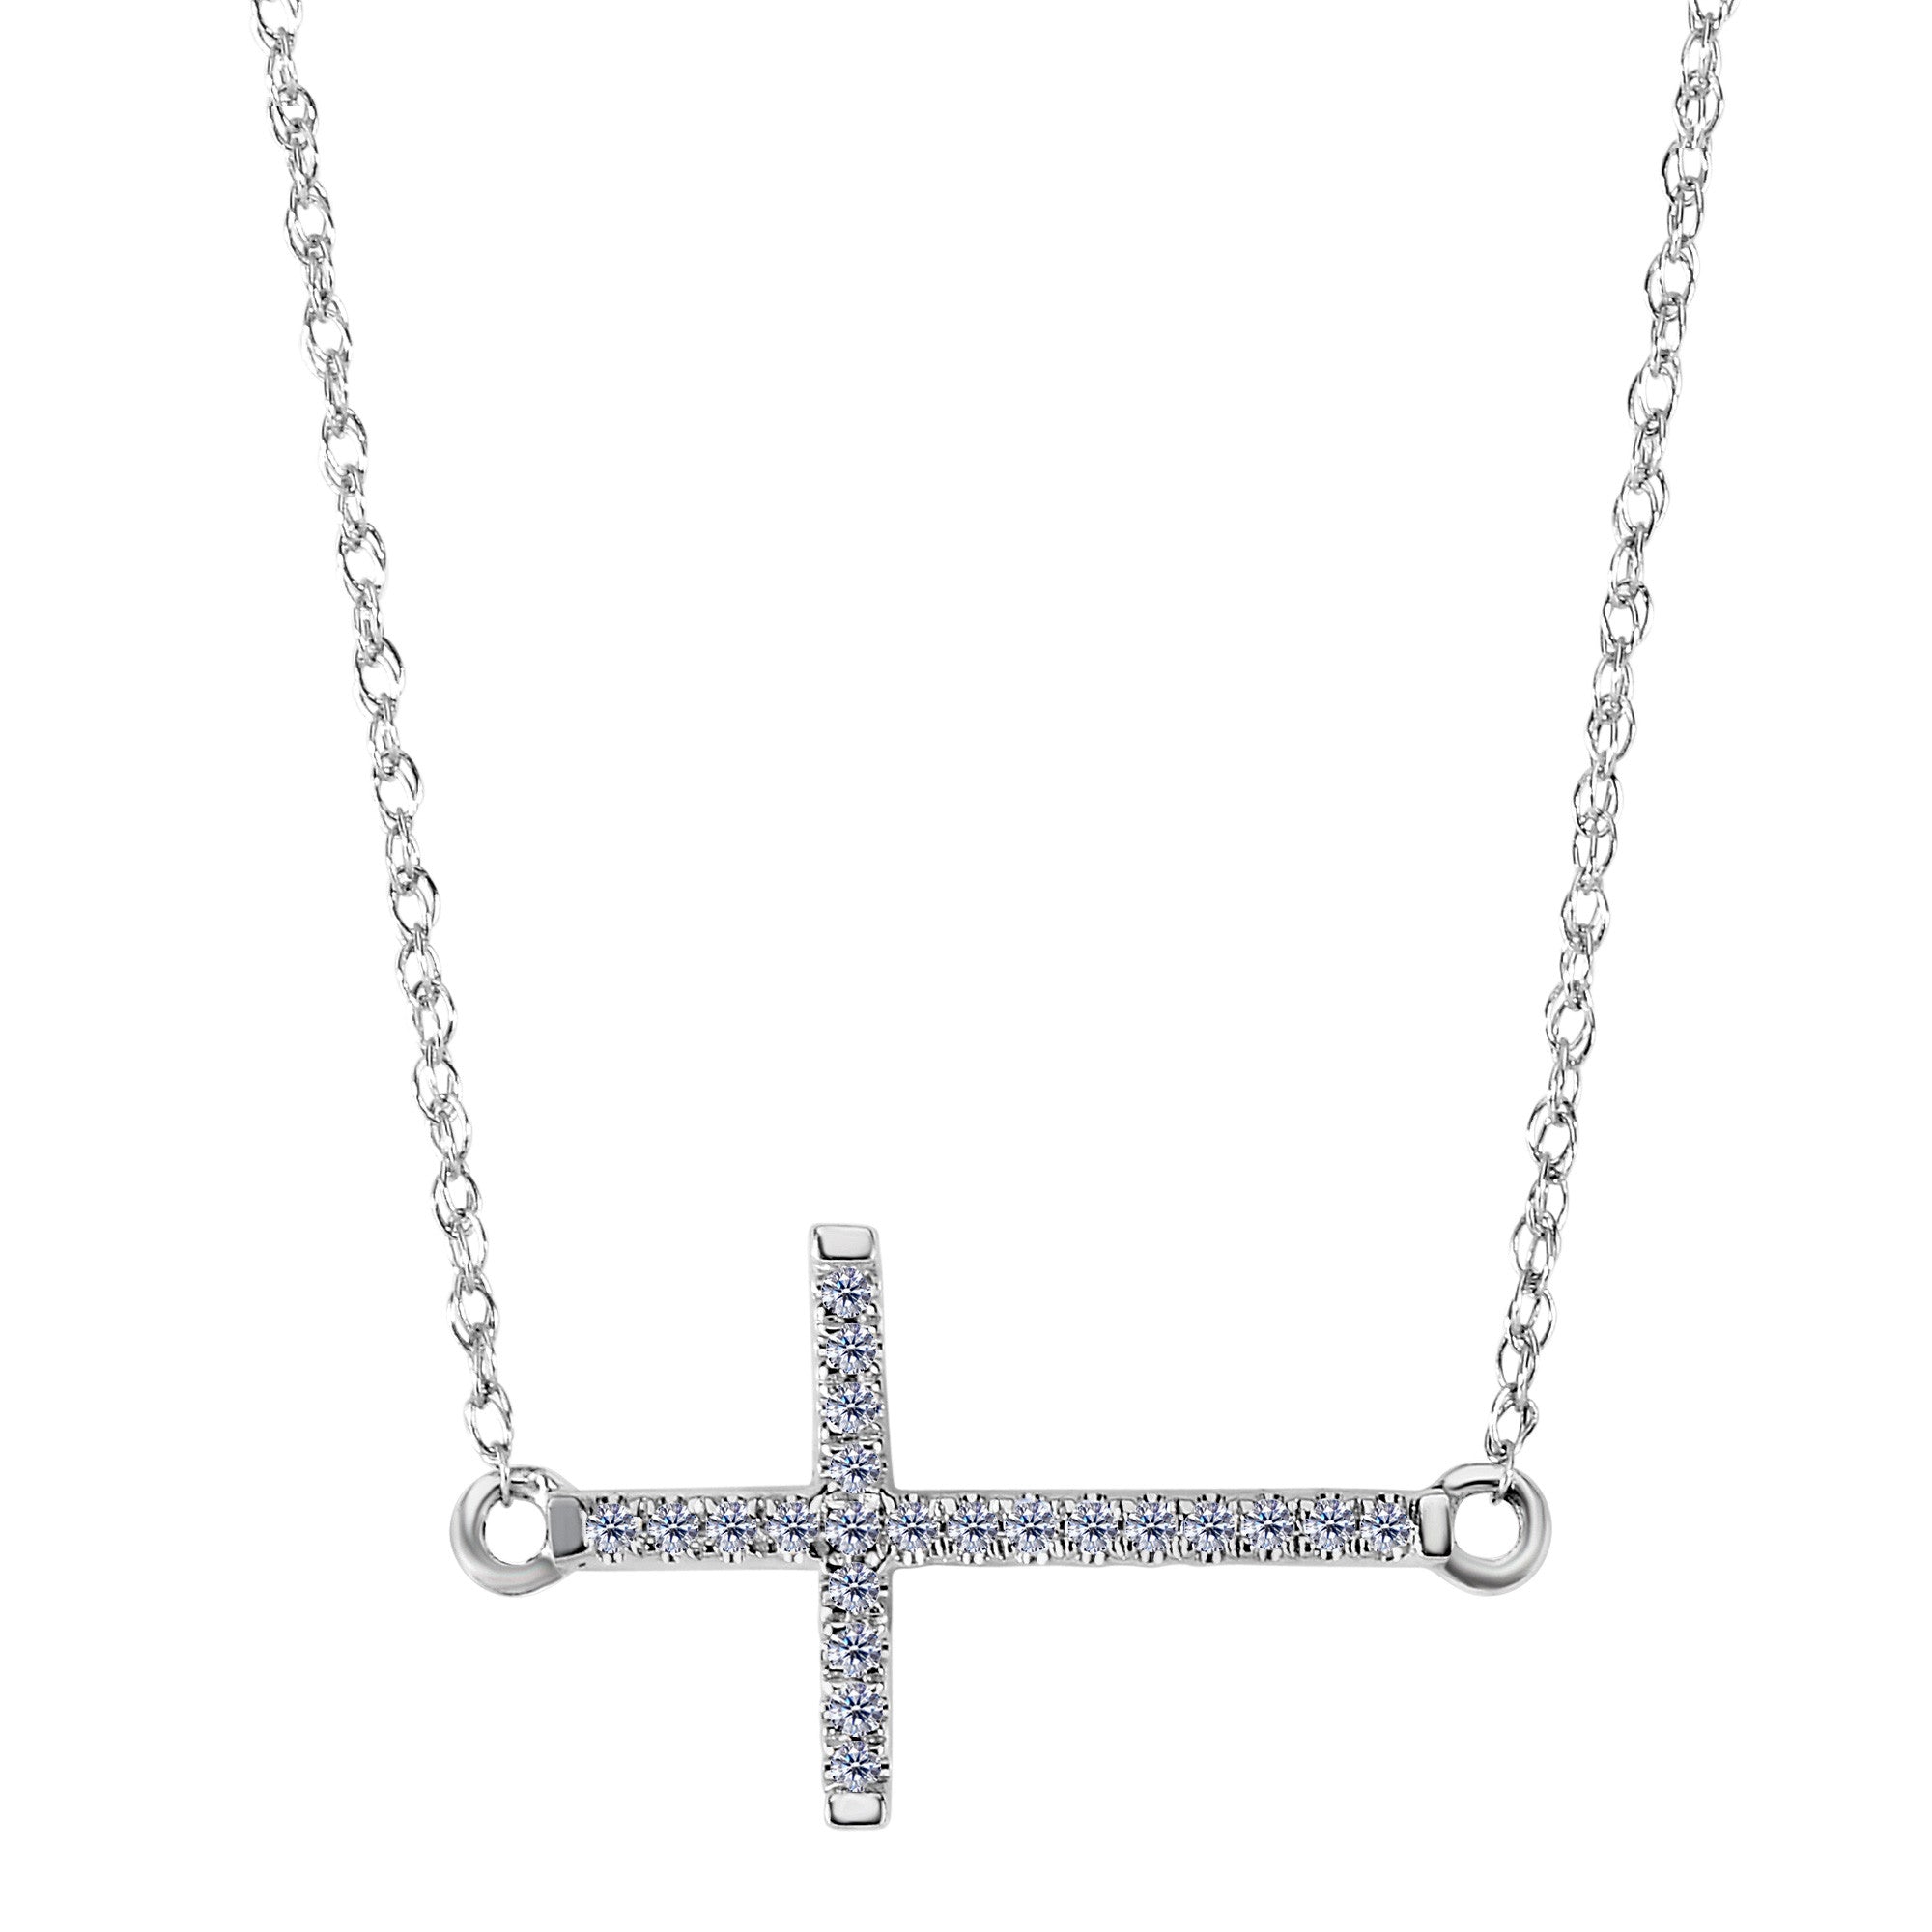 14k White Gold With 0.05ct Diamonds Side Ways Cross Necklace - 18 Inches fine designer jewelry for men and women